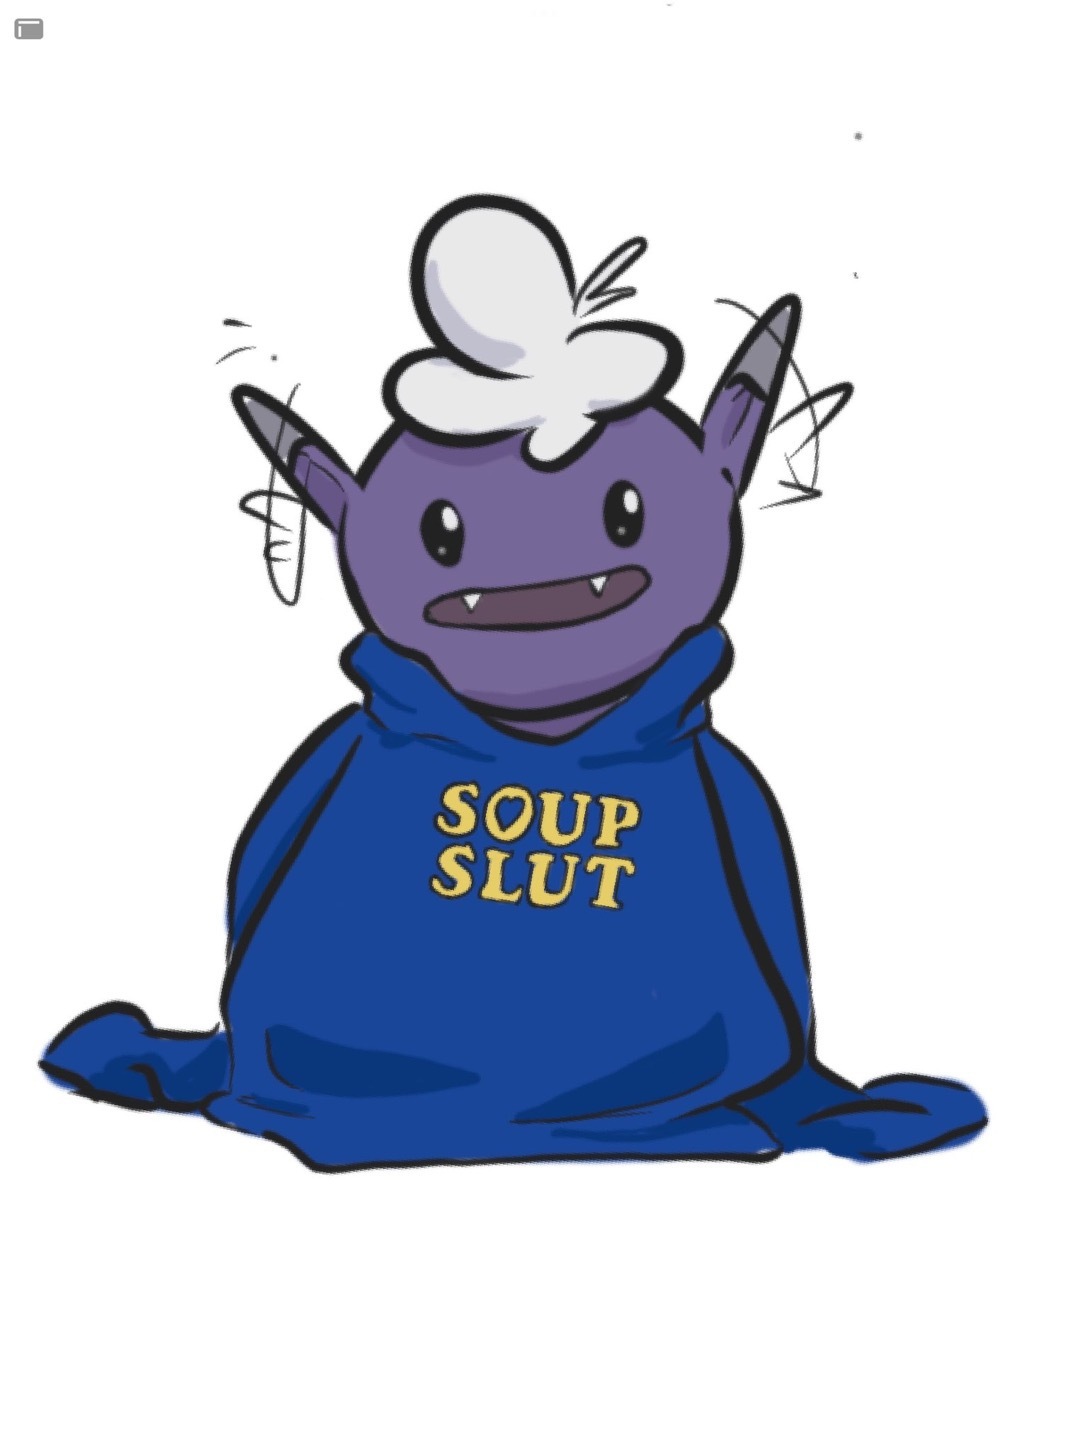 weezard really likes his soup